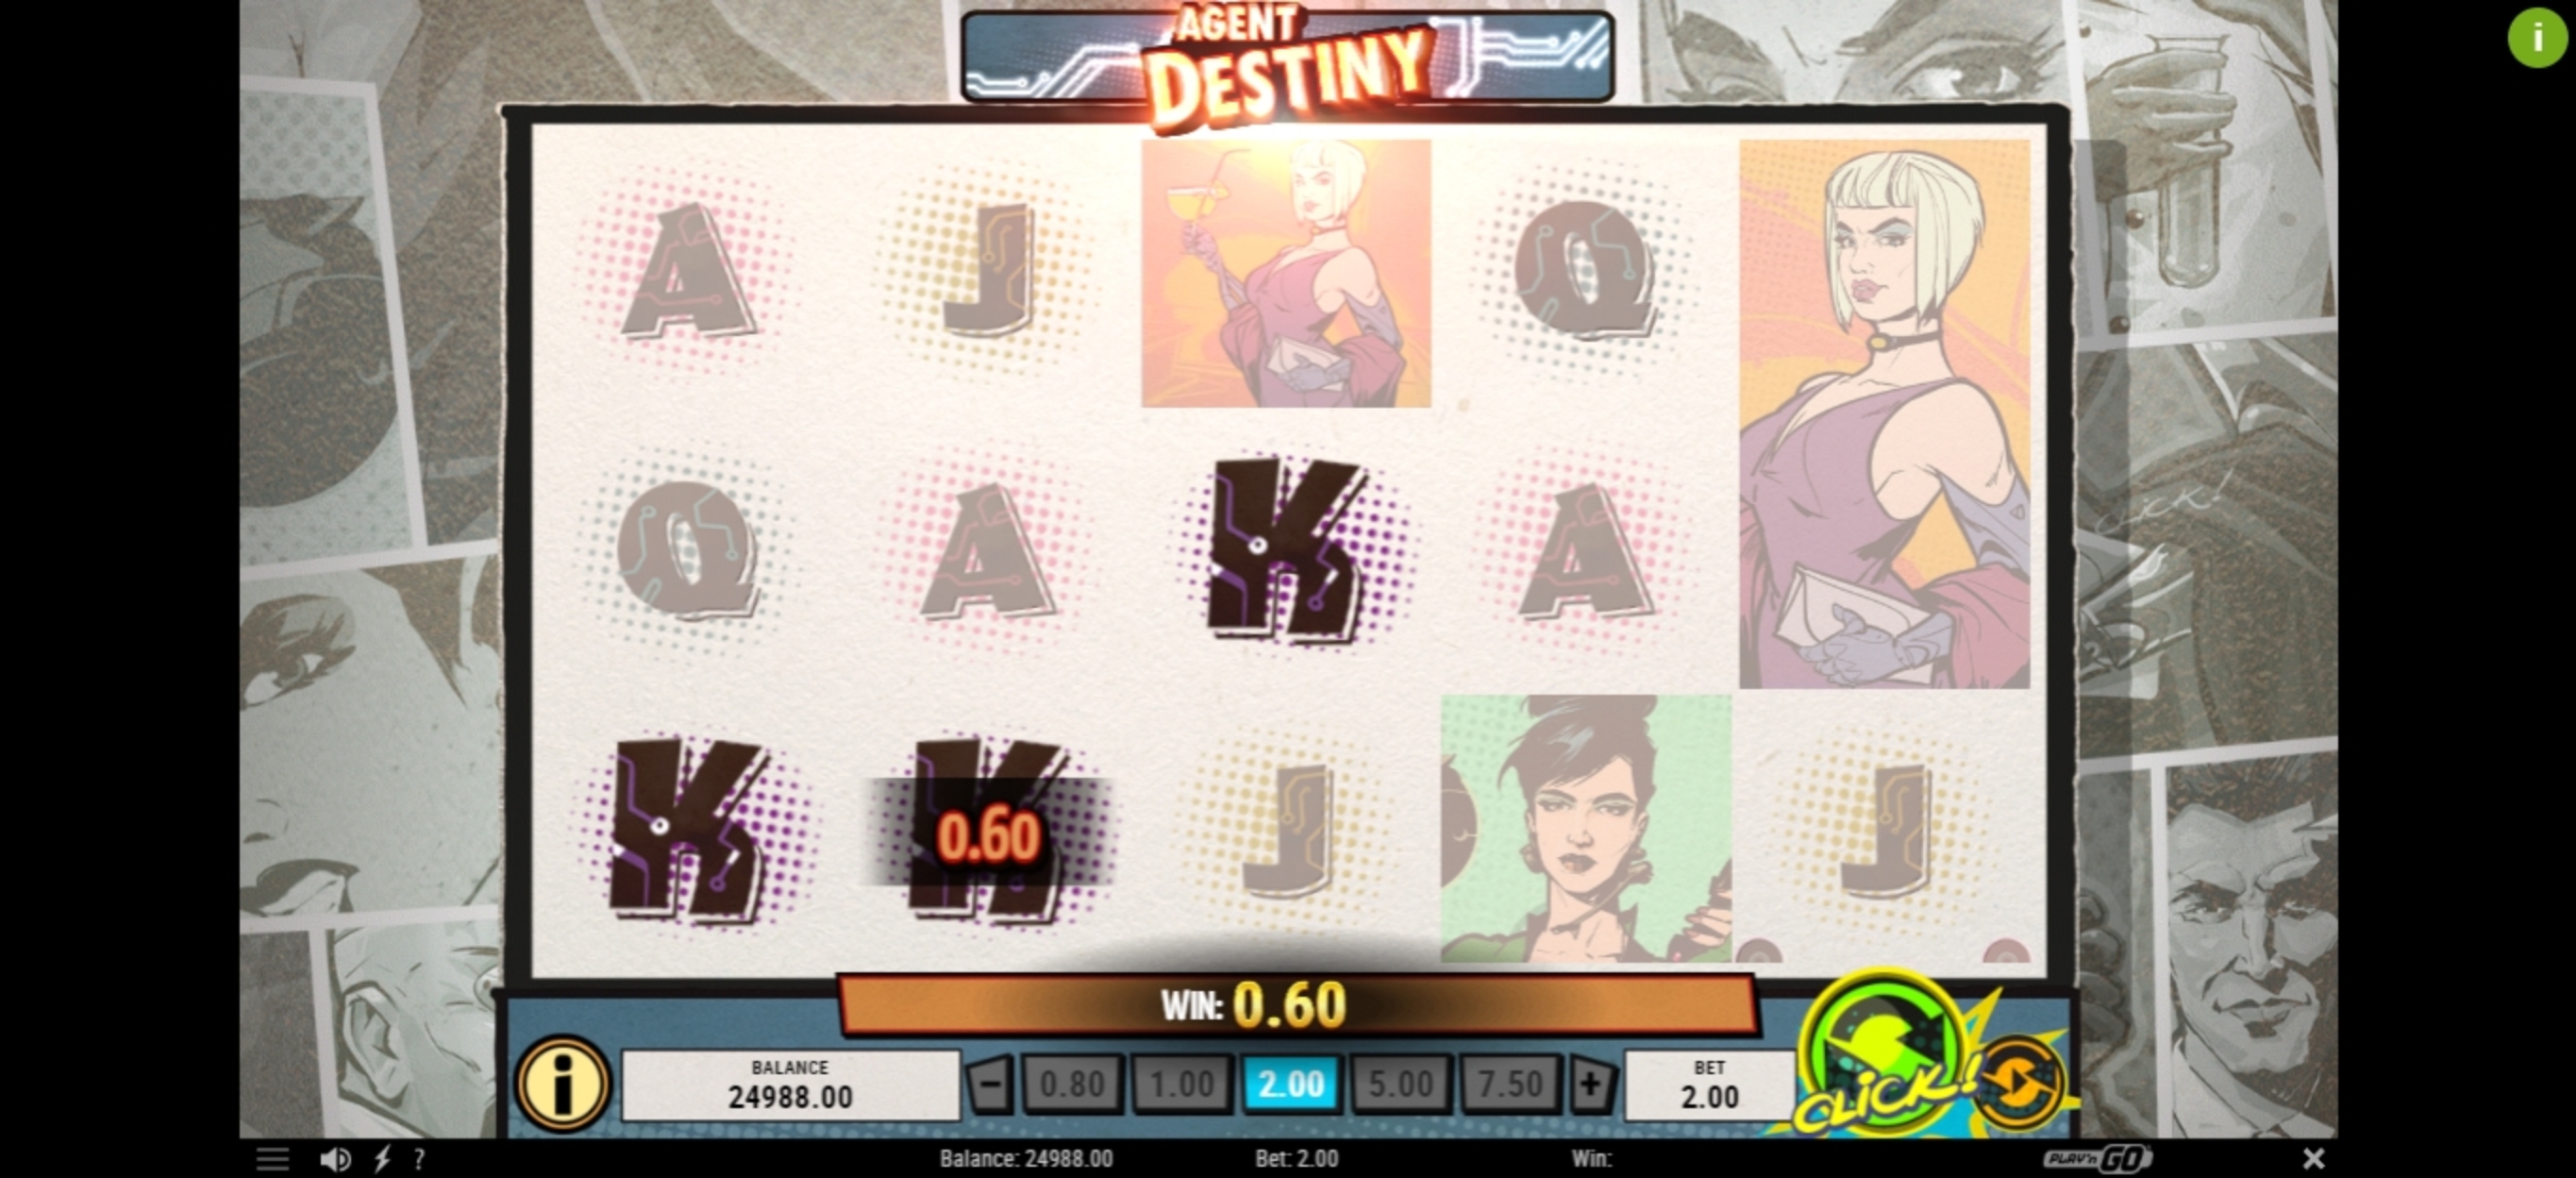 Win Money in Agent Destiny Free Slot Game by Playn GO